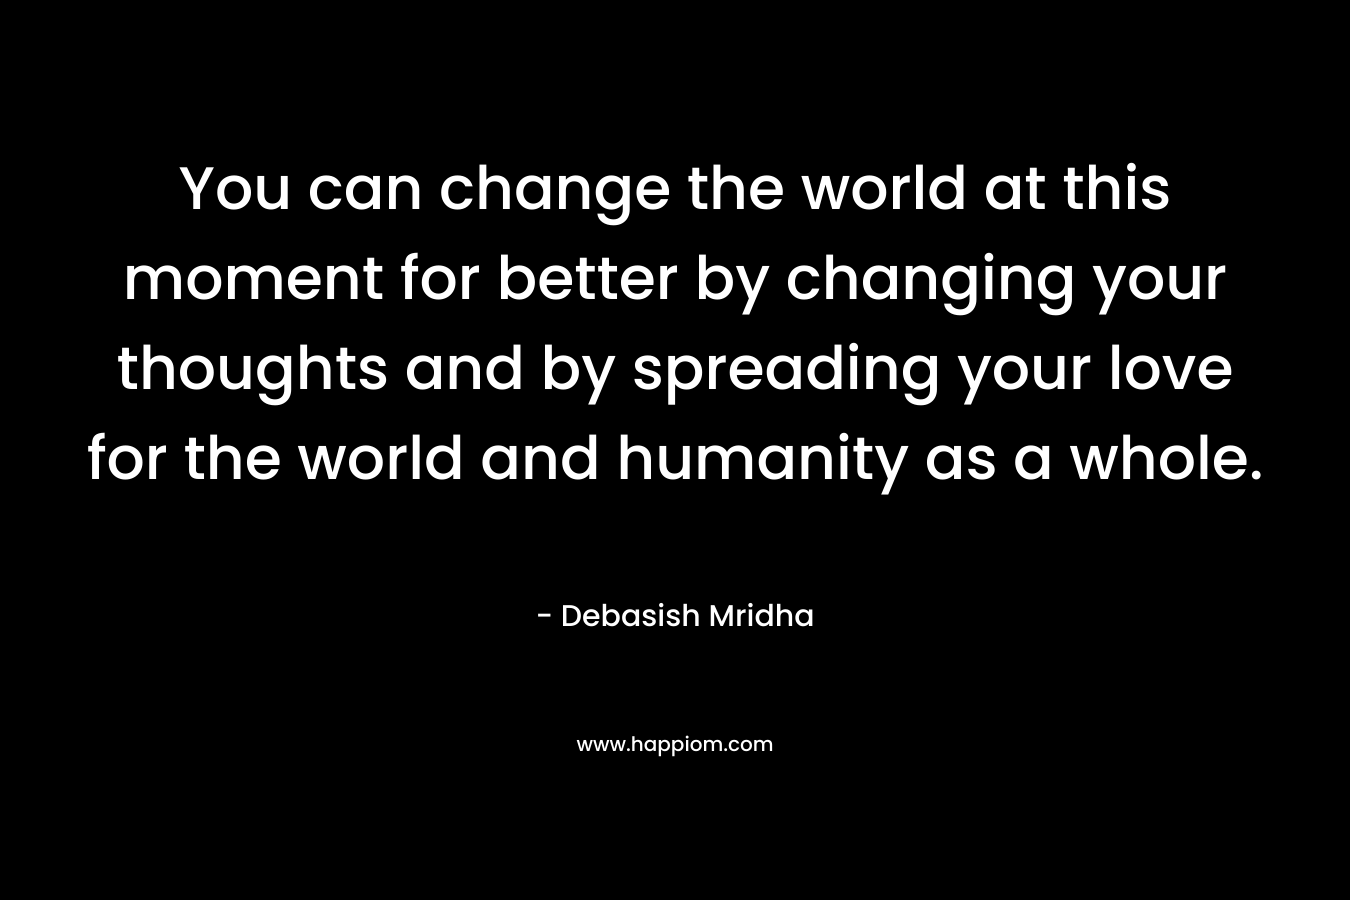 You can change the world at this moment for better by changing your thoughts and by spreading your love for the world and humanity as a whole.